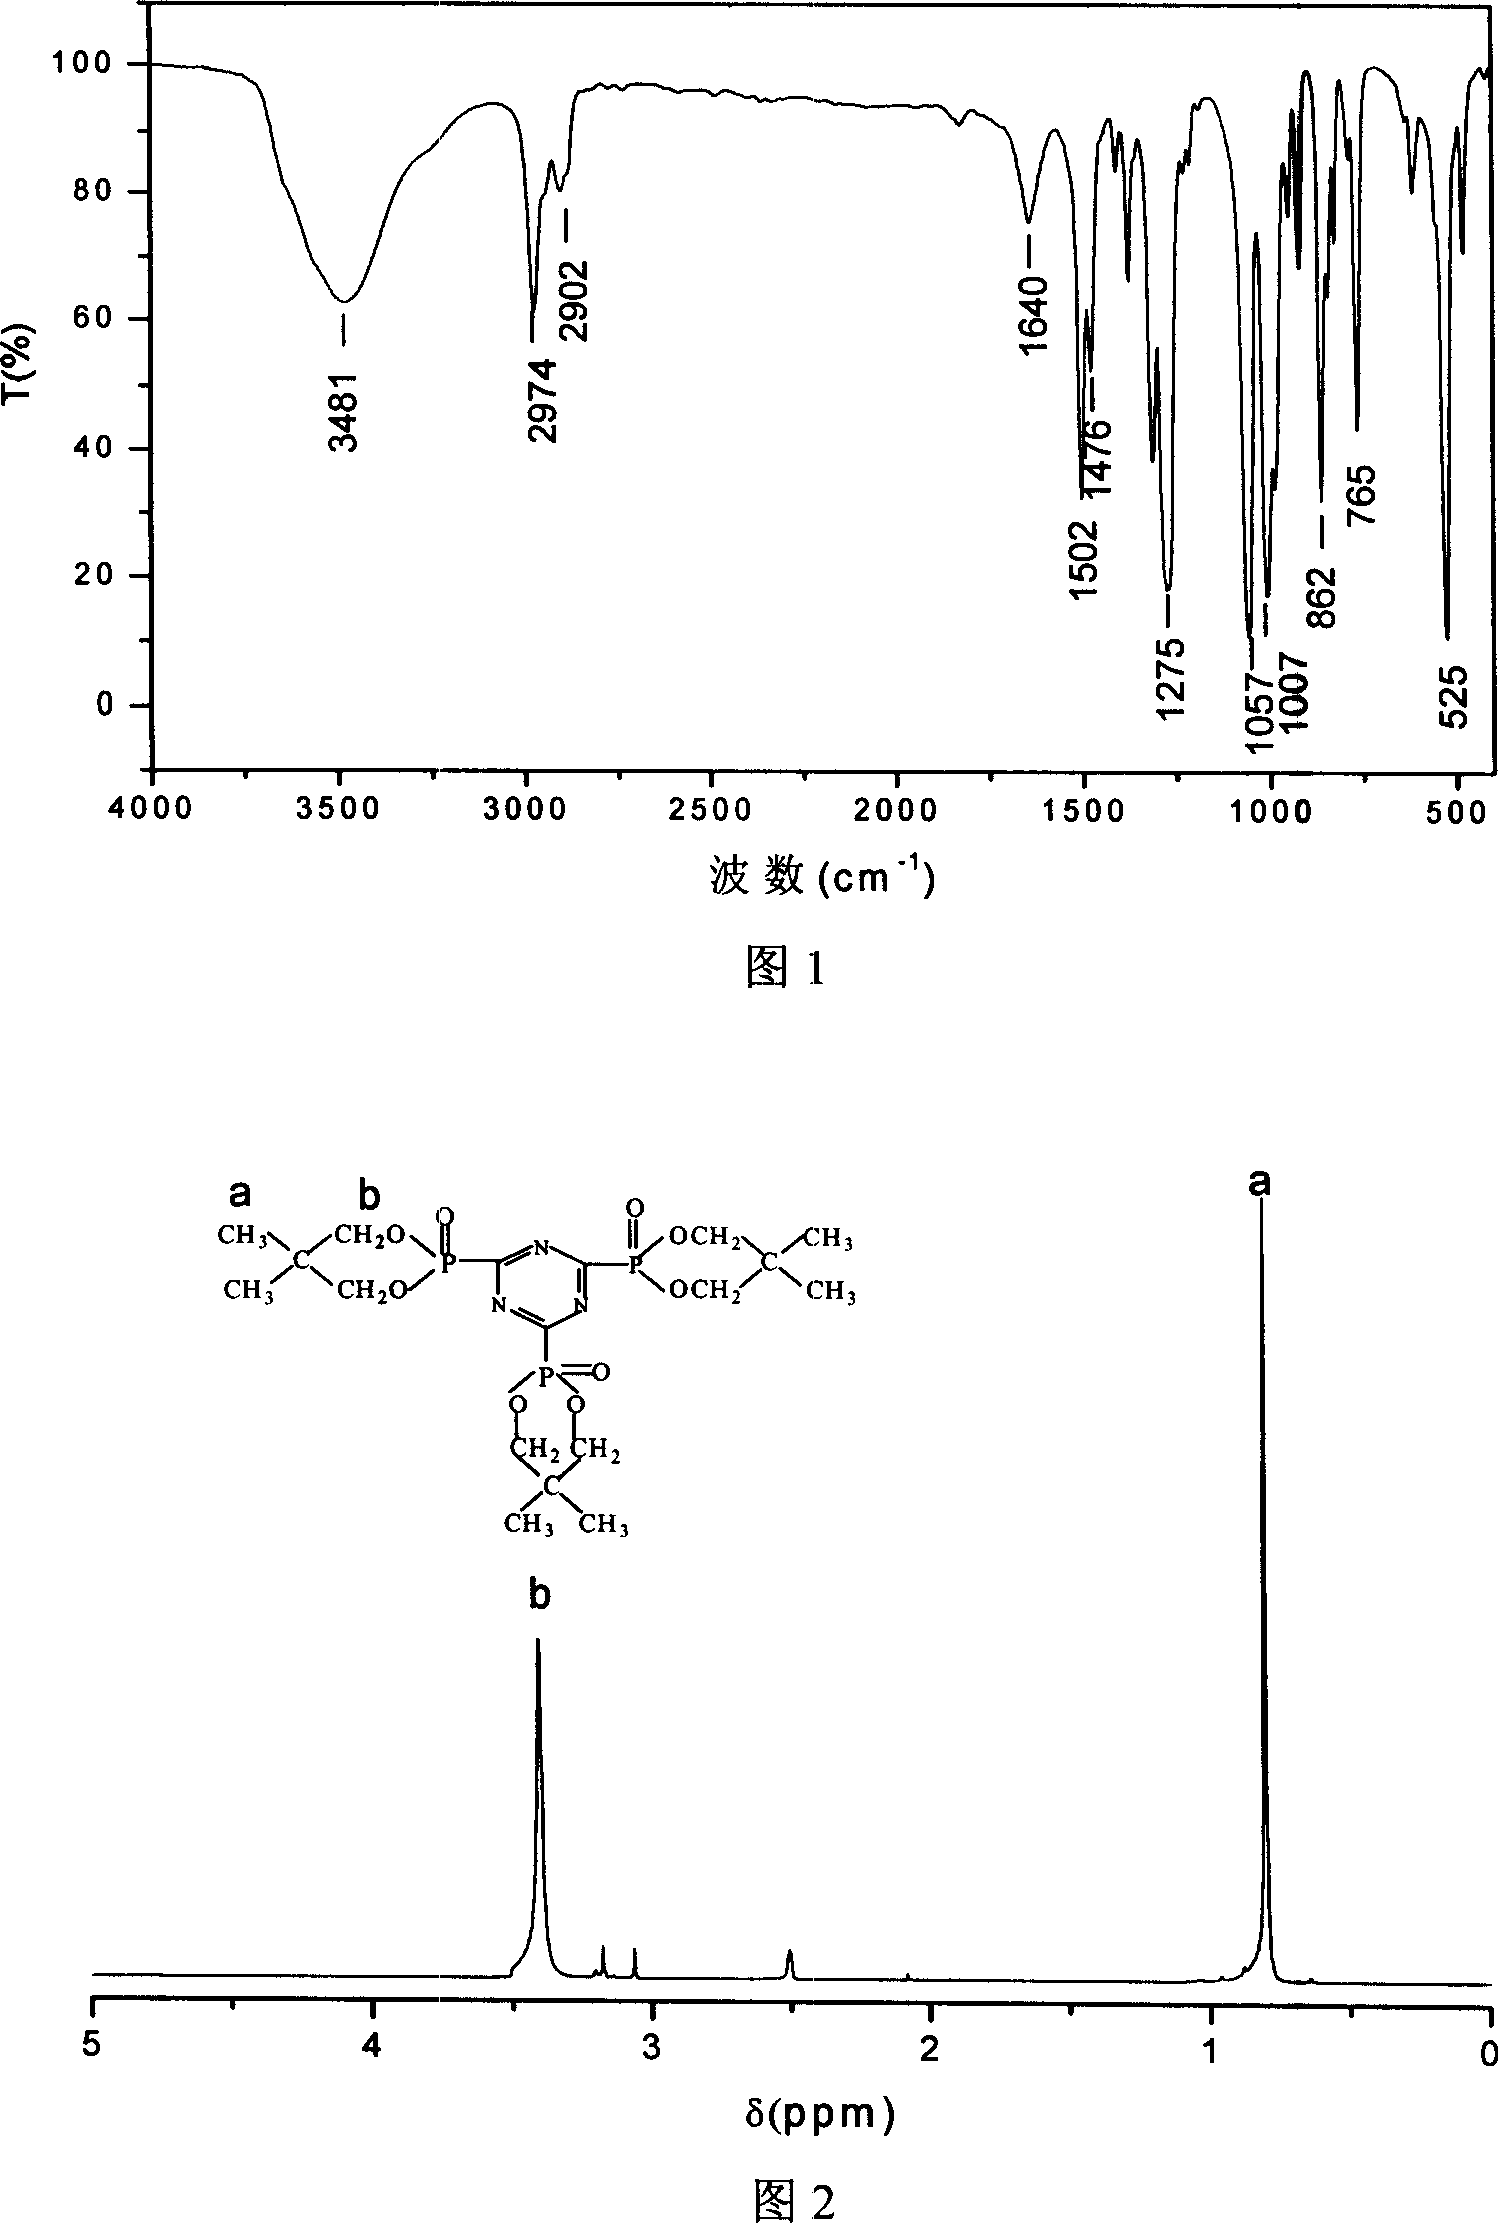 Triazine ring combustion inhibitor containing phosphorus and its preparing process